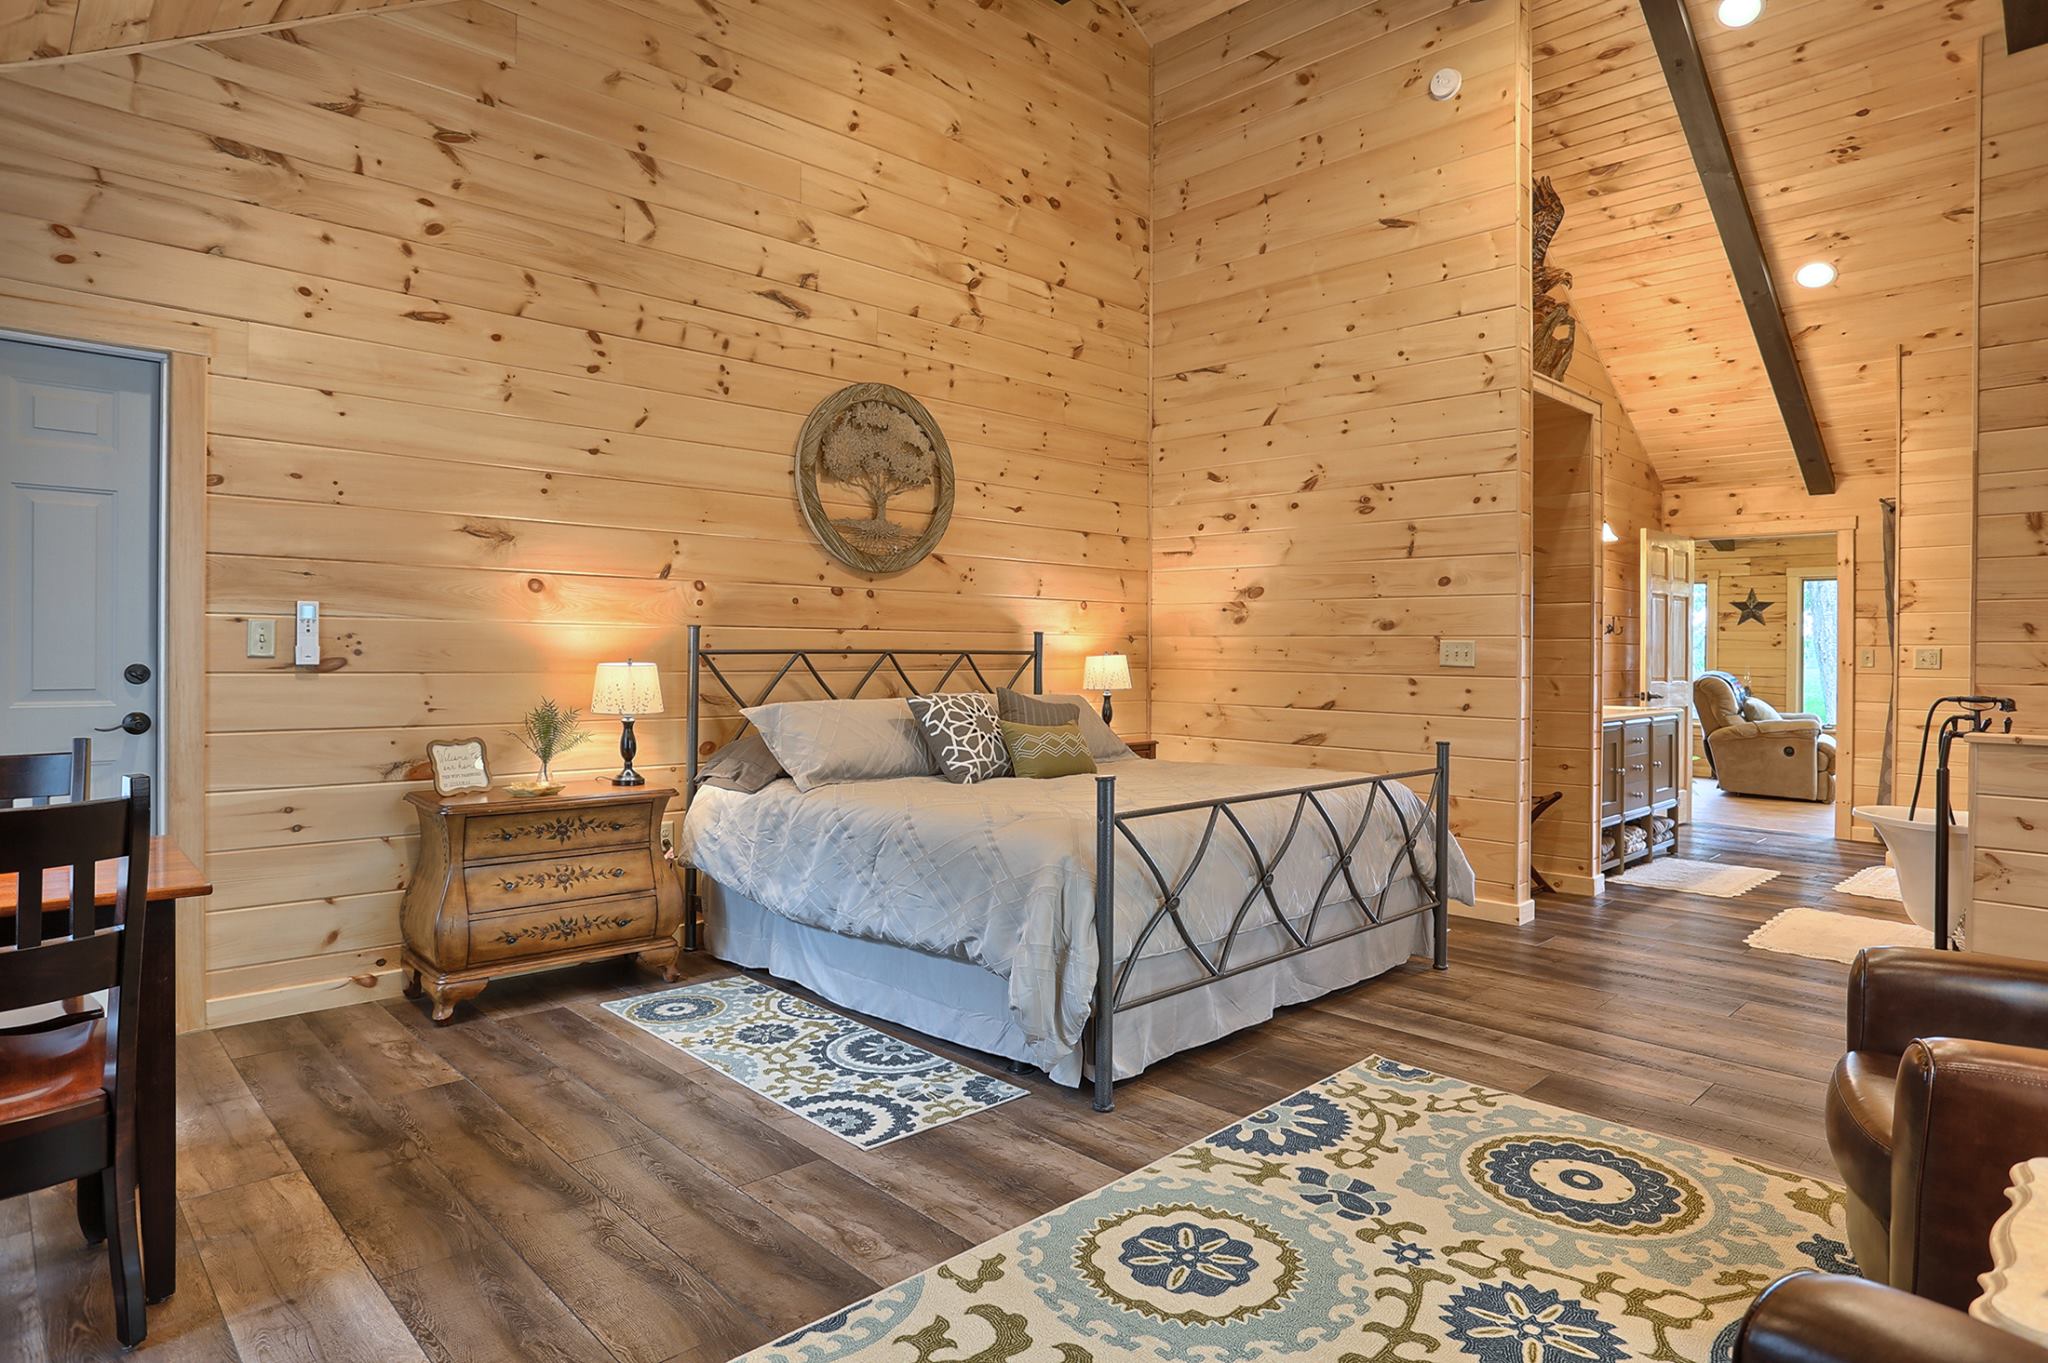 Beautiful Bedroom inside a wooden B and B